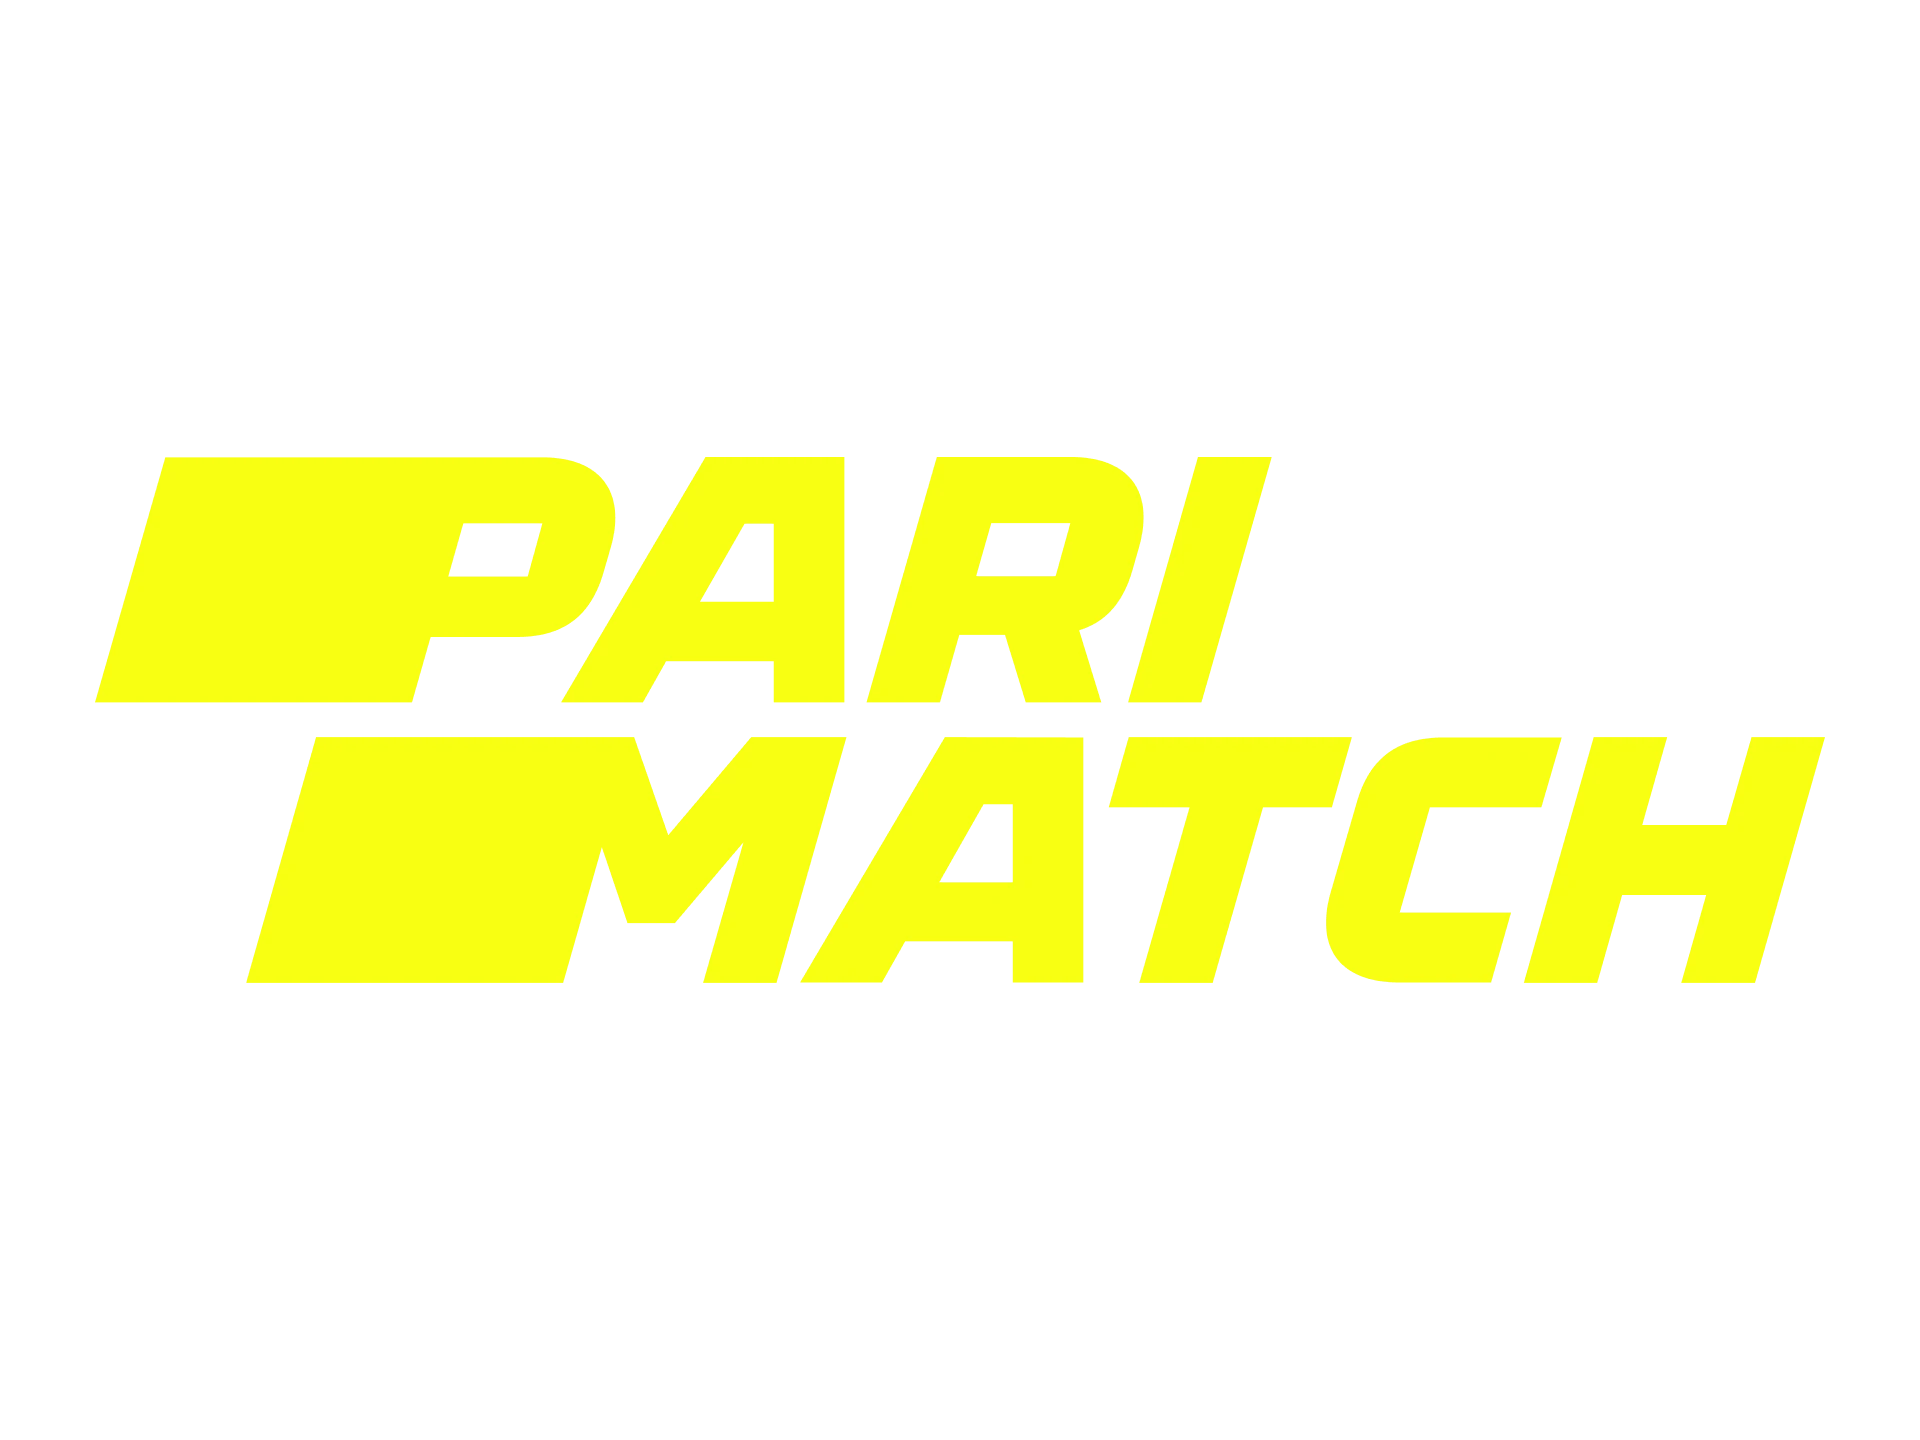 Parimatch is a good choice for betting on cricket.